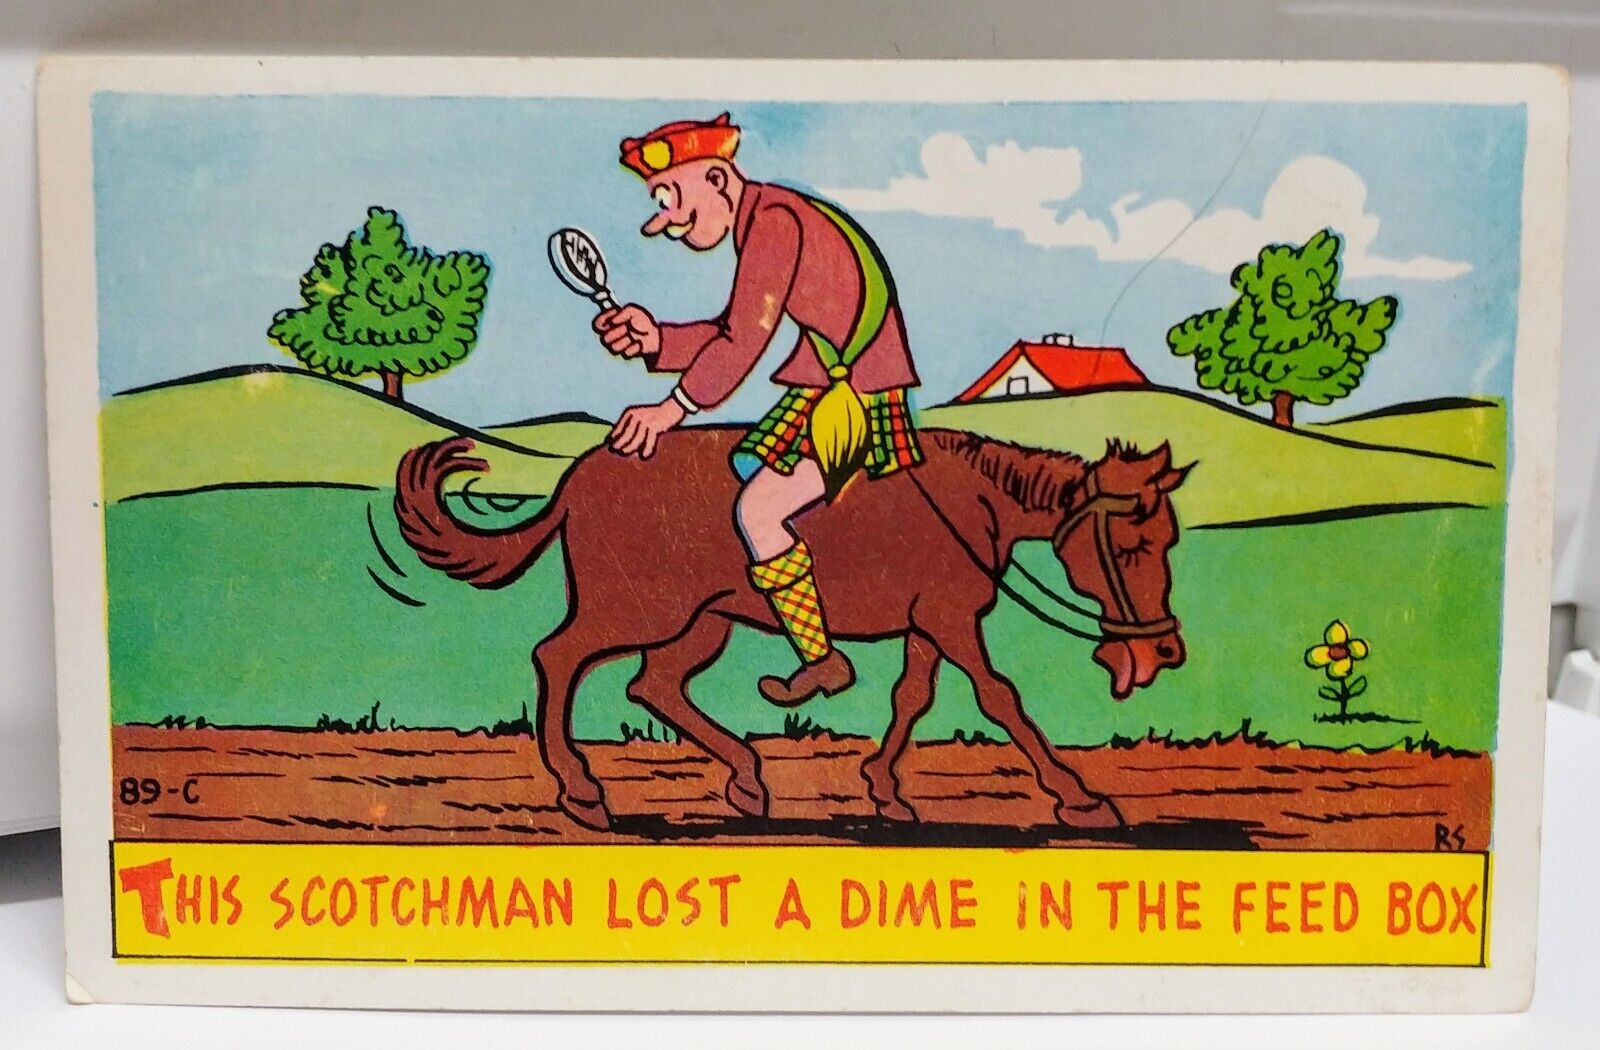 Postcard Vtg Humor Funny Comic Scotchman Lost A Dime In The Feed Box 1950's